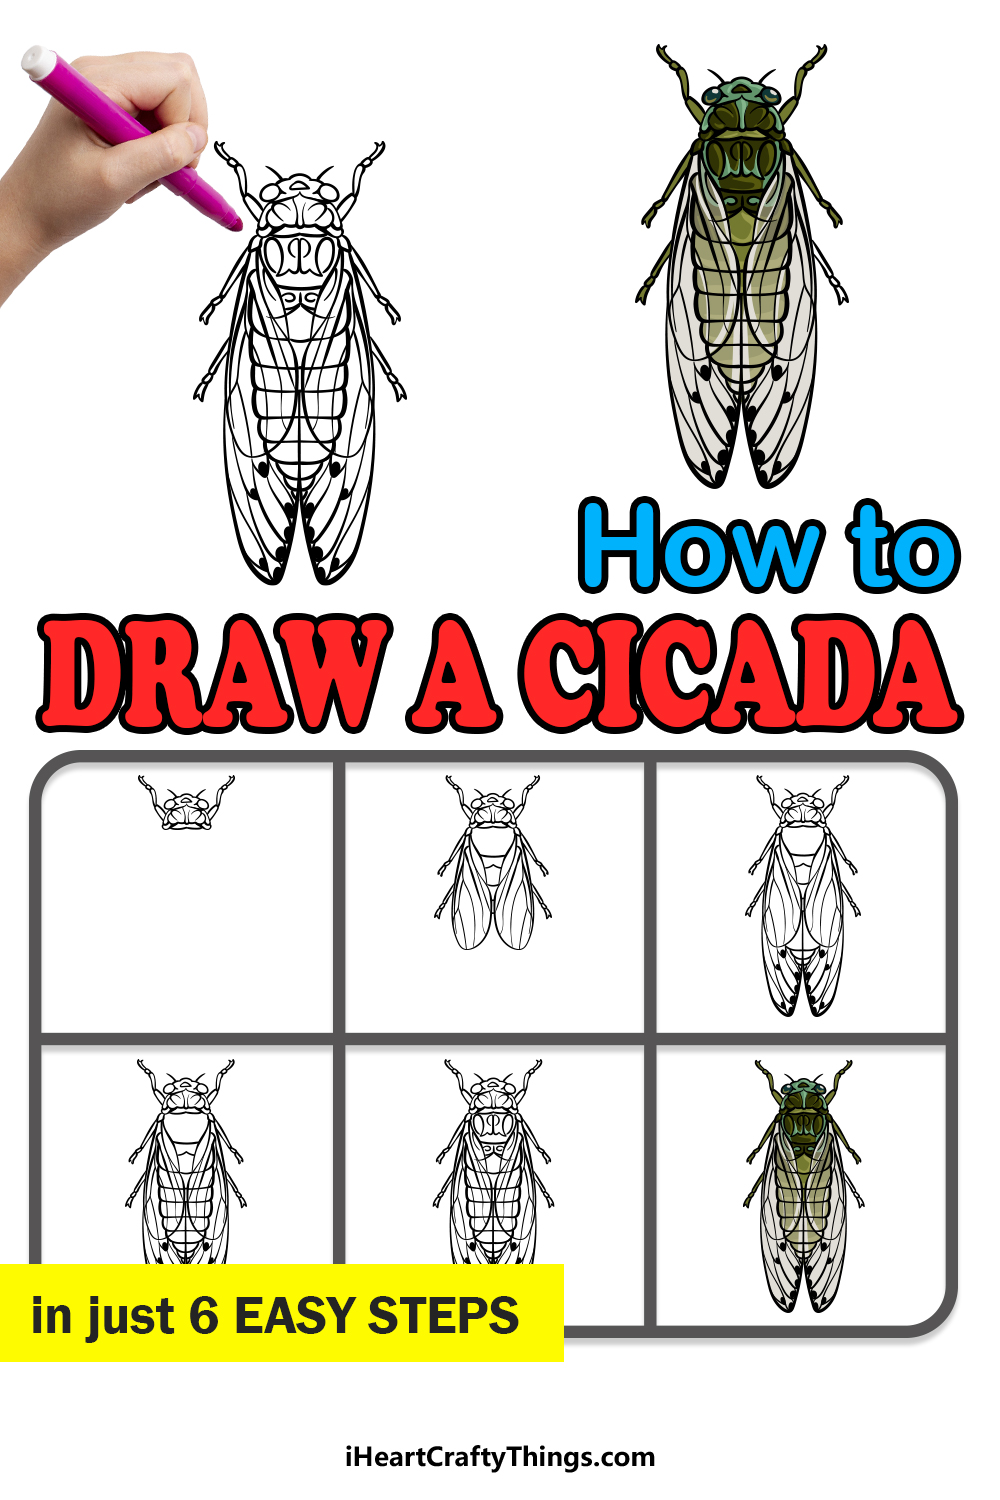 how to draw a Cicada in 6 easy steps